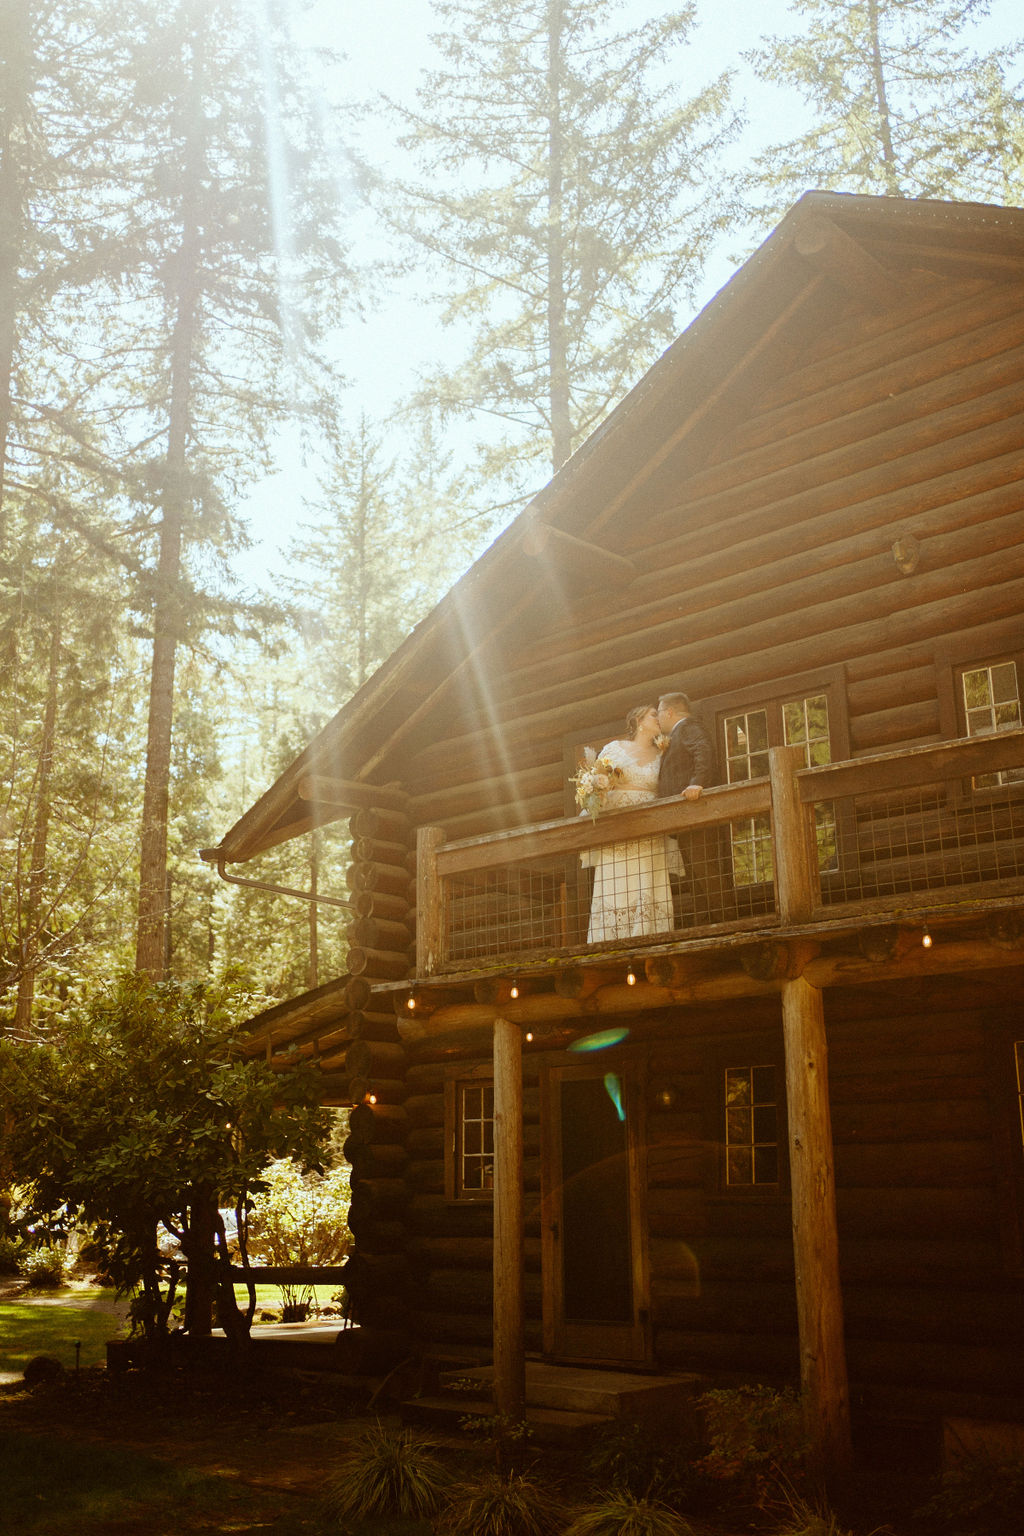 The bride and groom kissing on the balcony of this rustic cabin at loloma lodge 